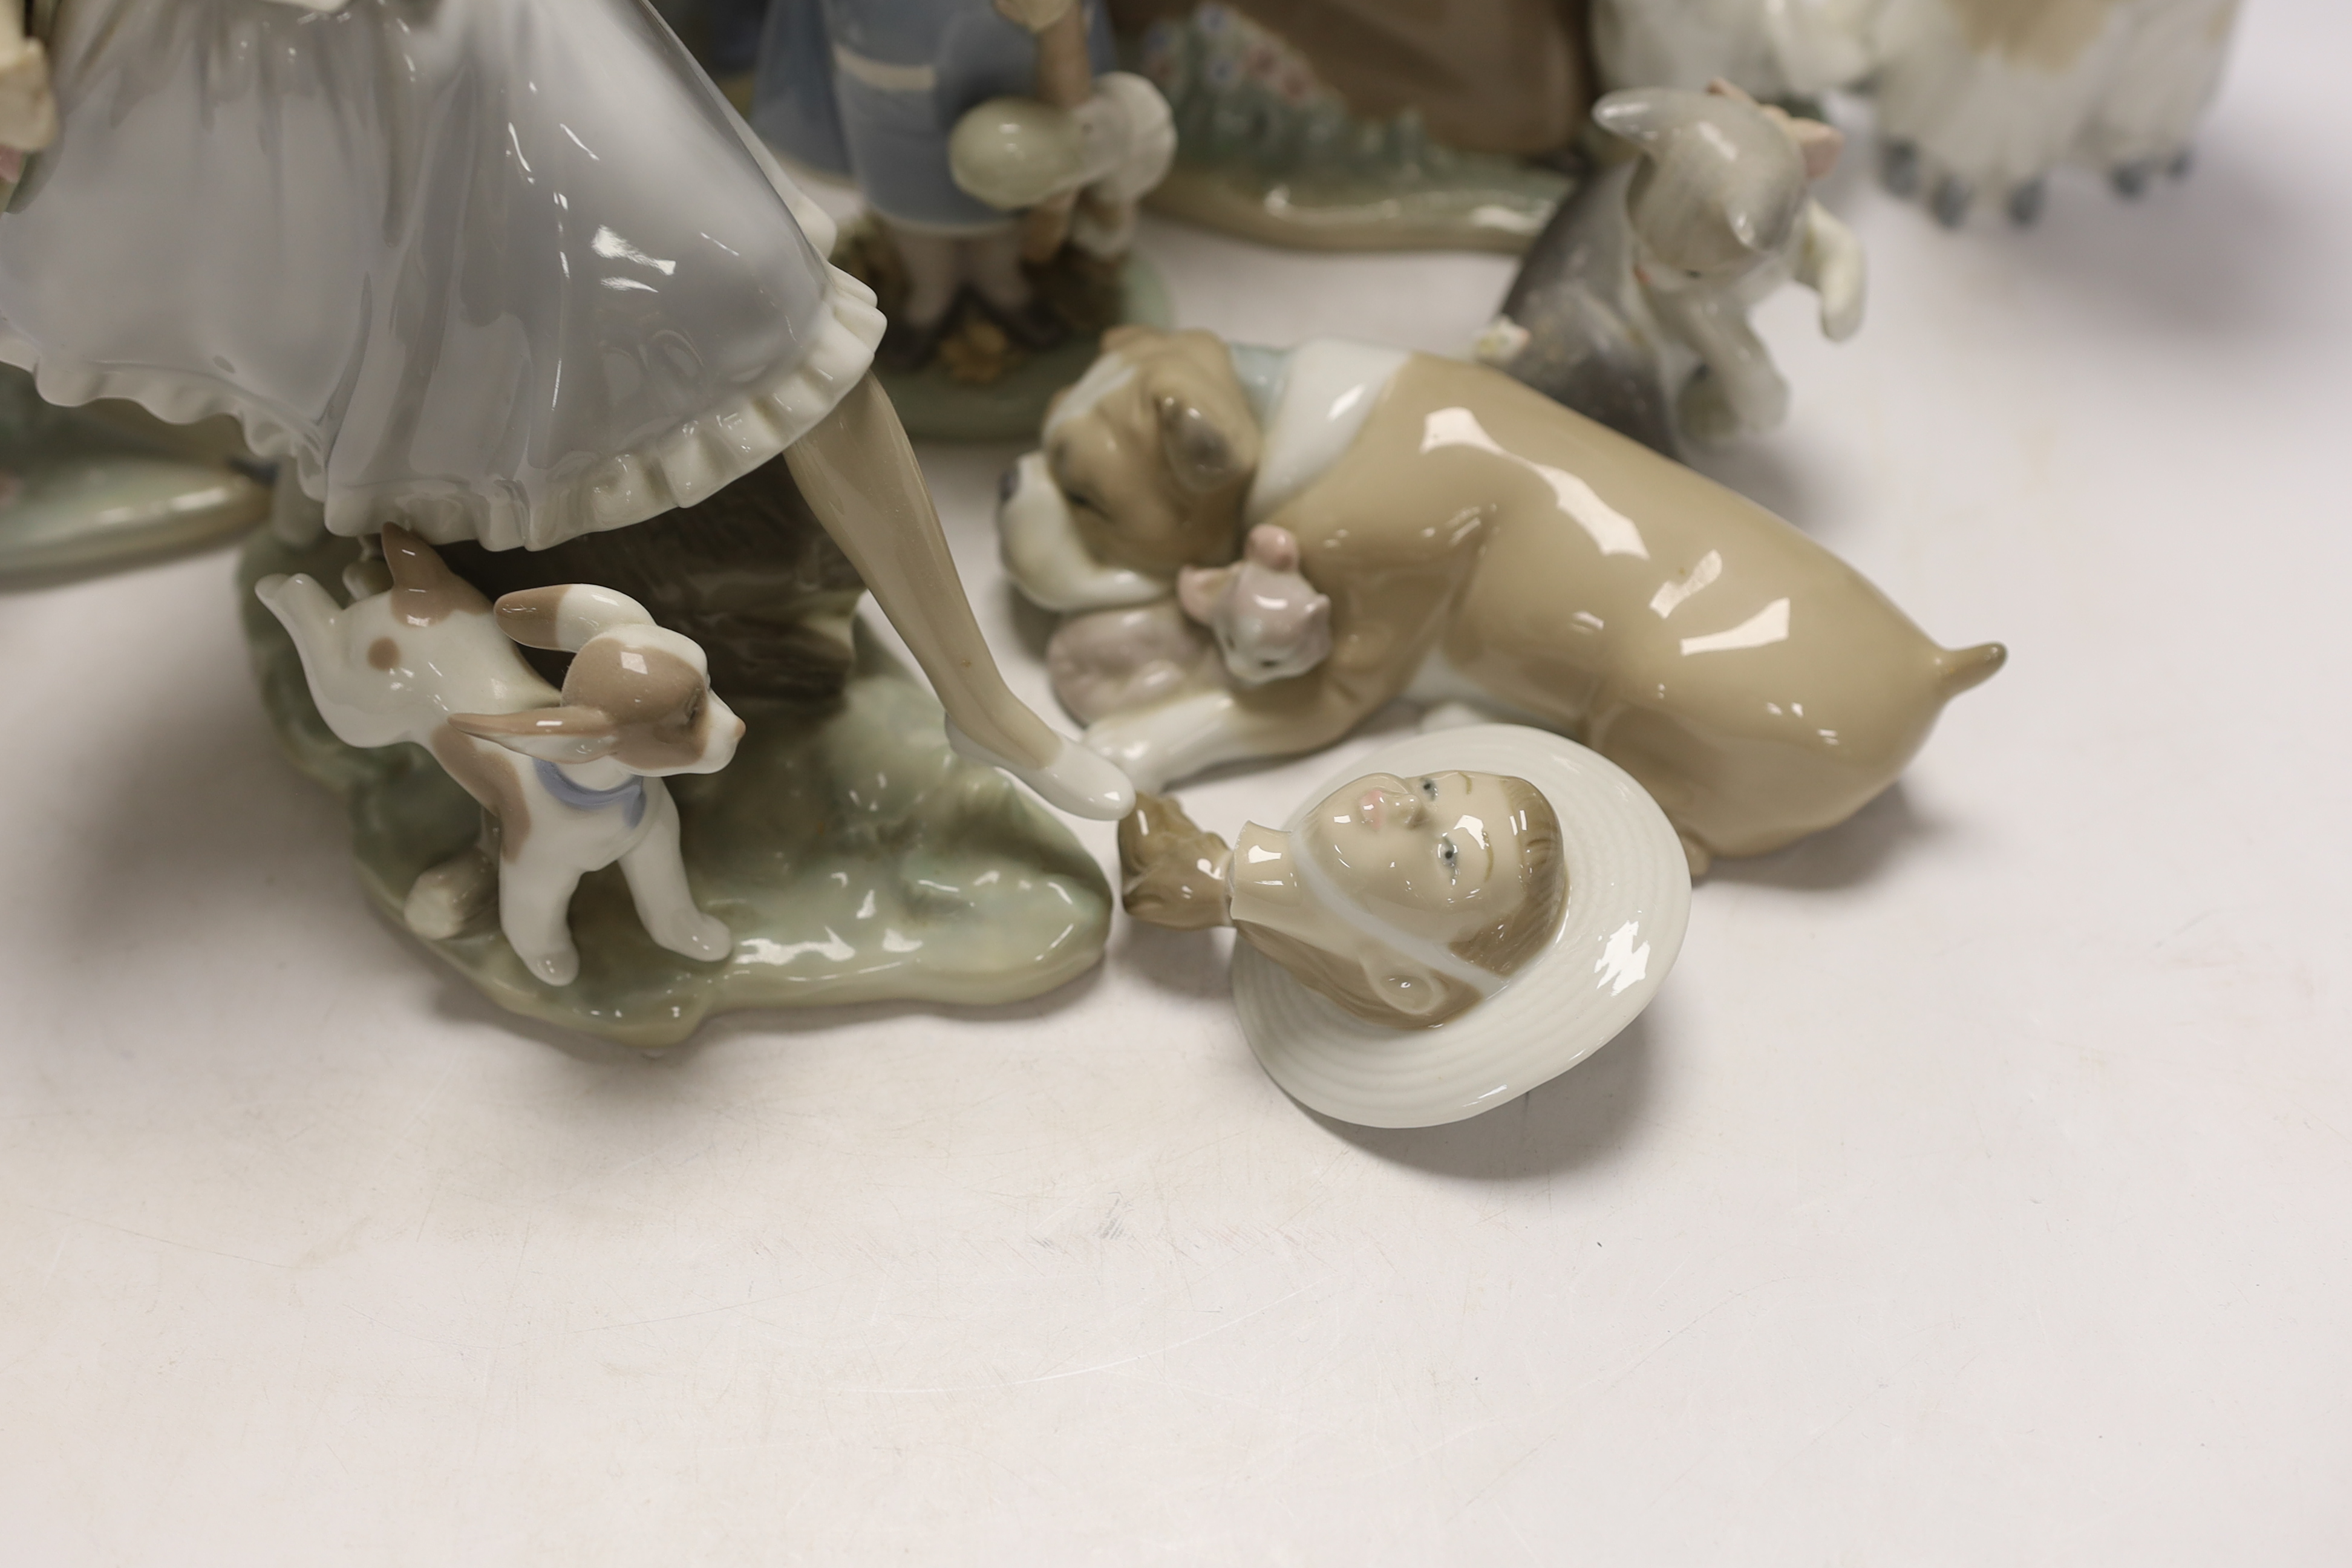 Ten Lladro and Nao figures including a short eared owl and a girl with braids, largest 26cm high